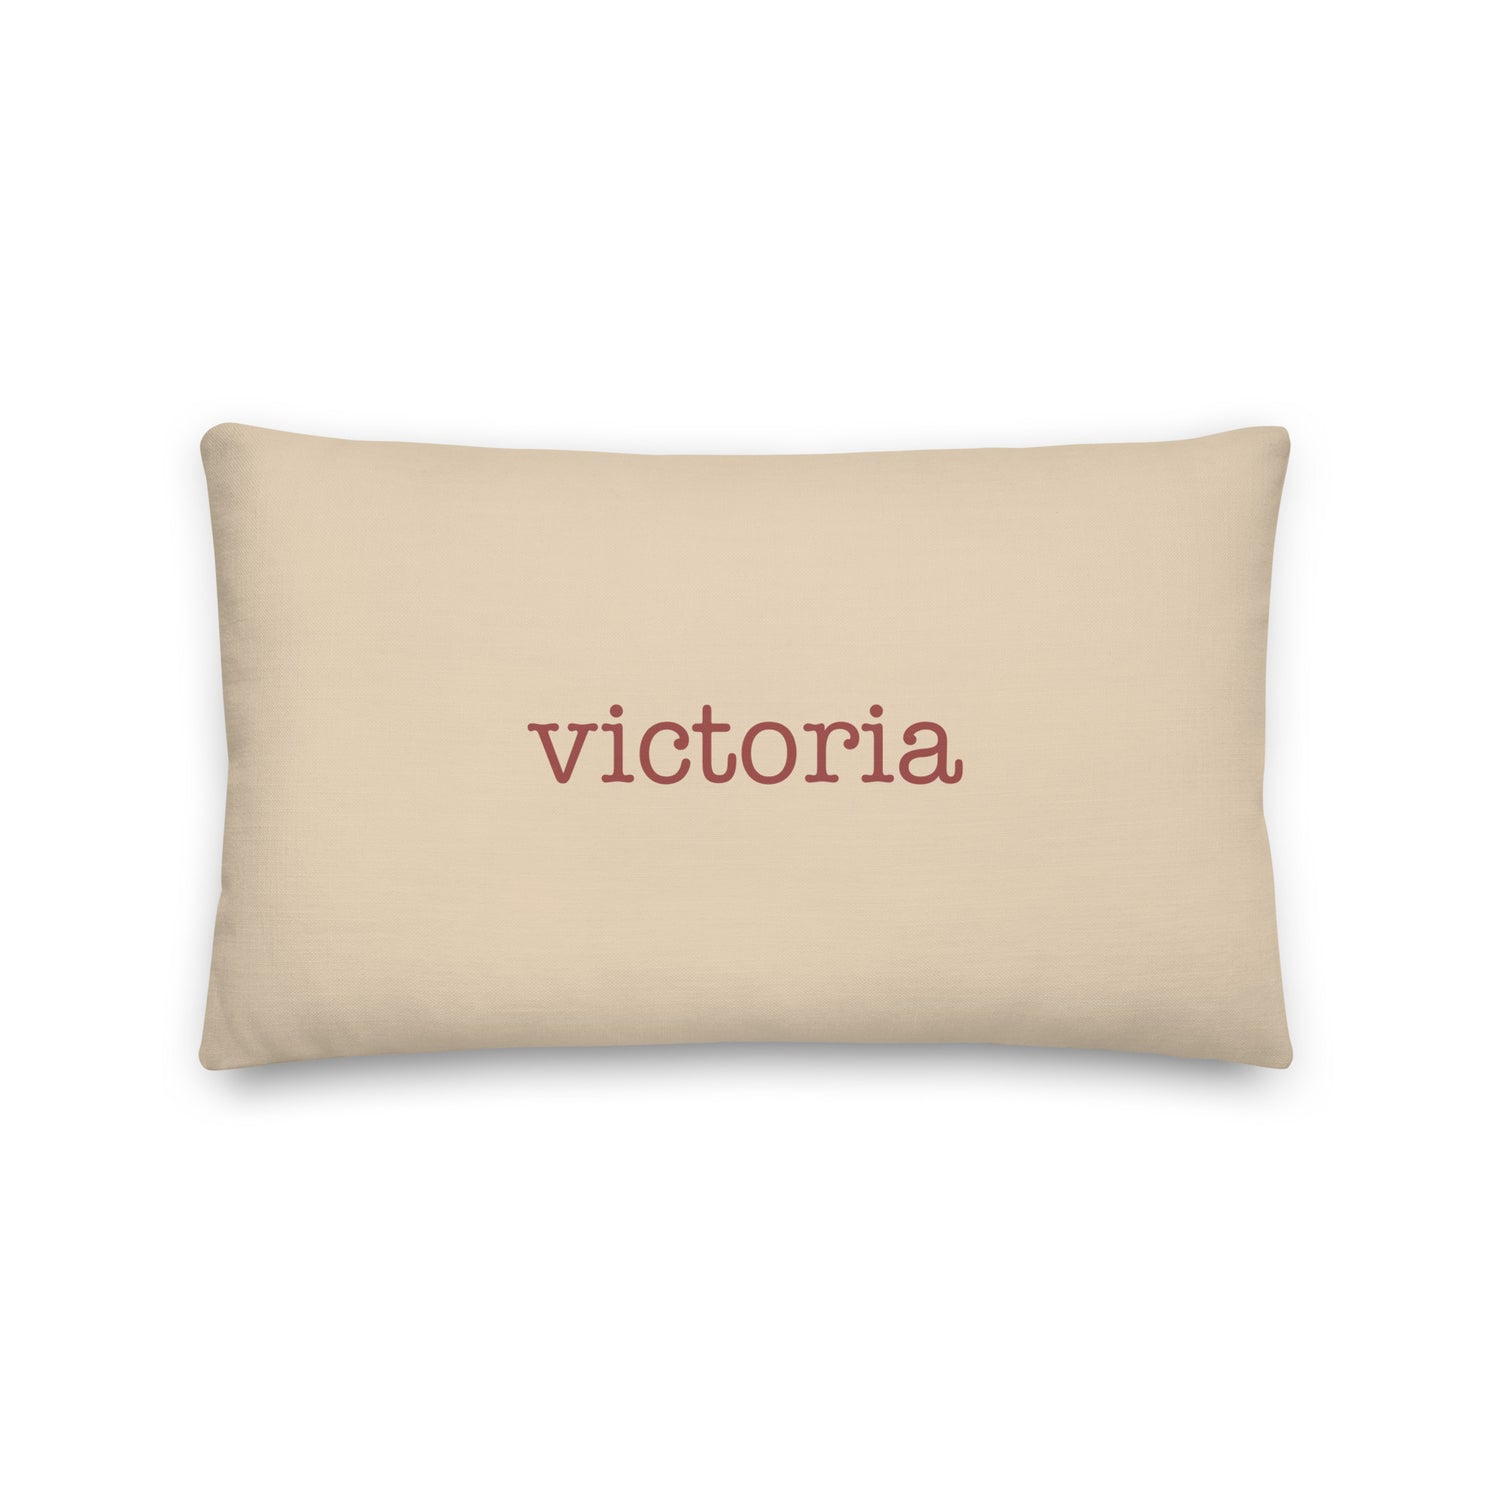 Victoria British Columbia Pillows and Blankets • YYJ Airport Code